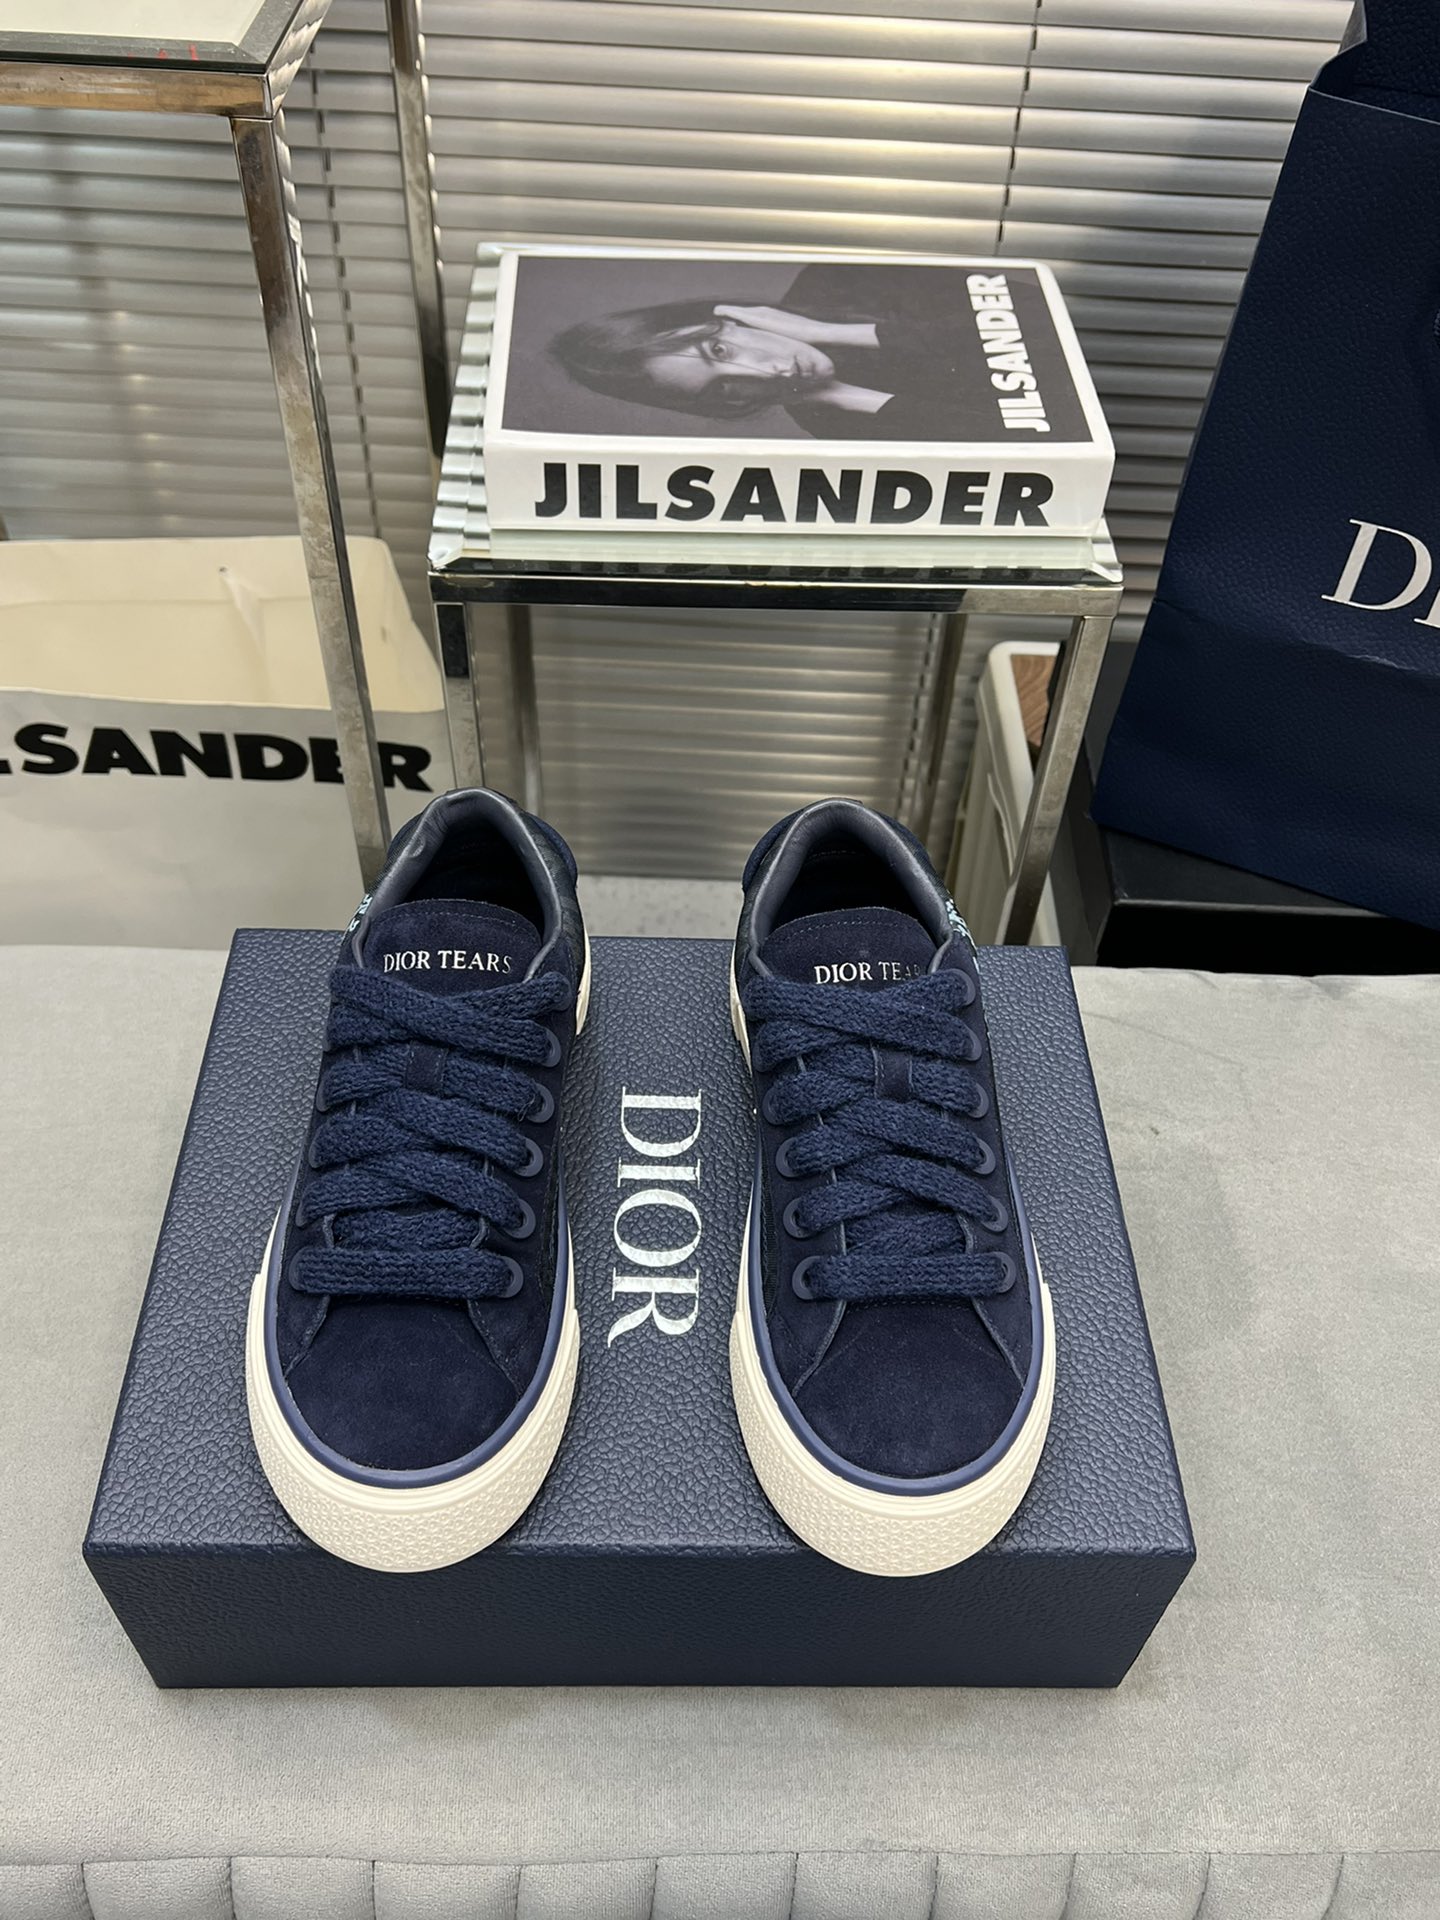 Dior Skateboard Shoes Sneakers Blue Navy White Yellow Printing Unisex Women Men Cowhide Denim Rubber Sheepskin TPU Fall Collection Oblique Casual